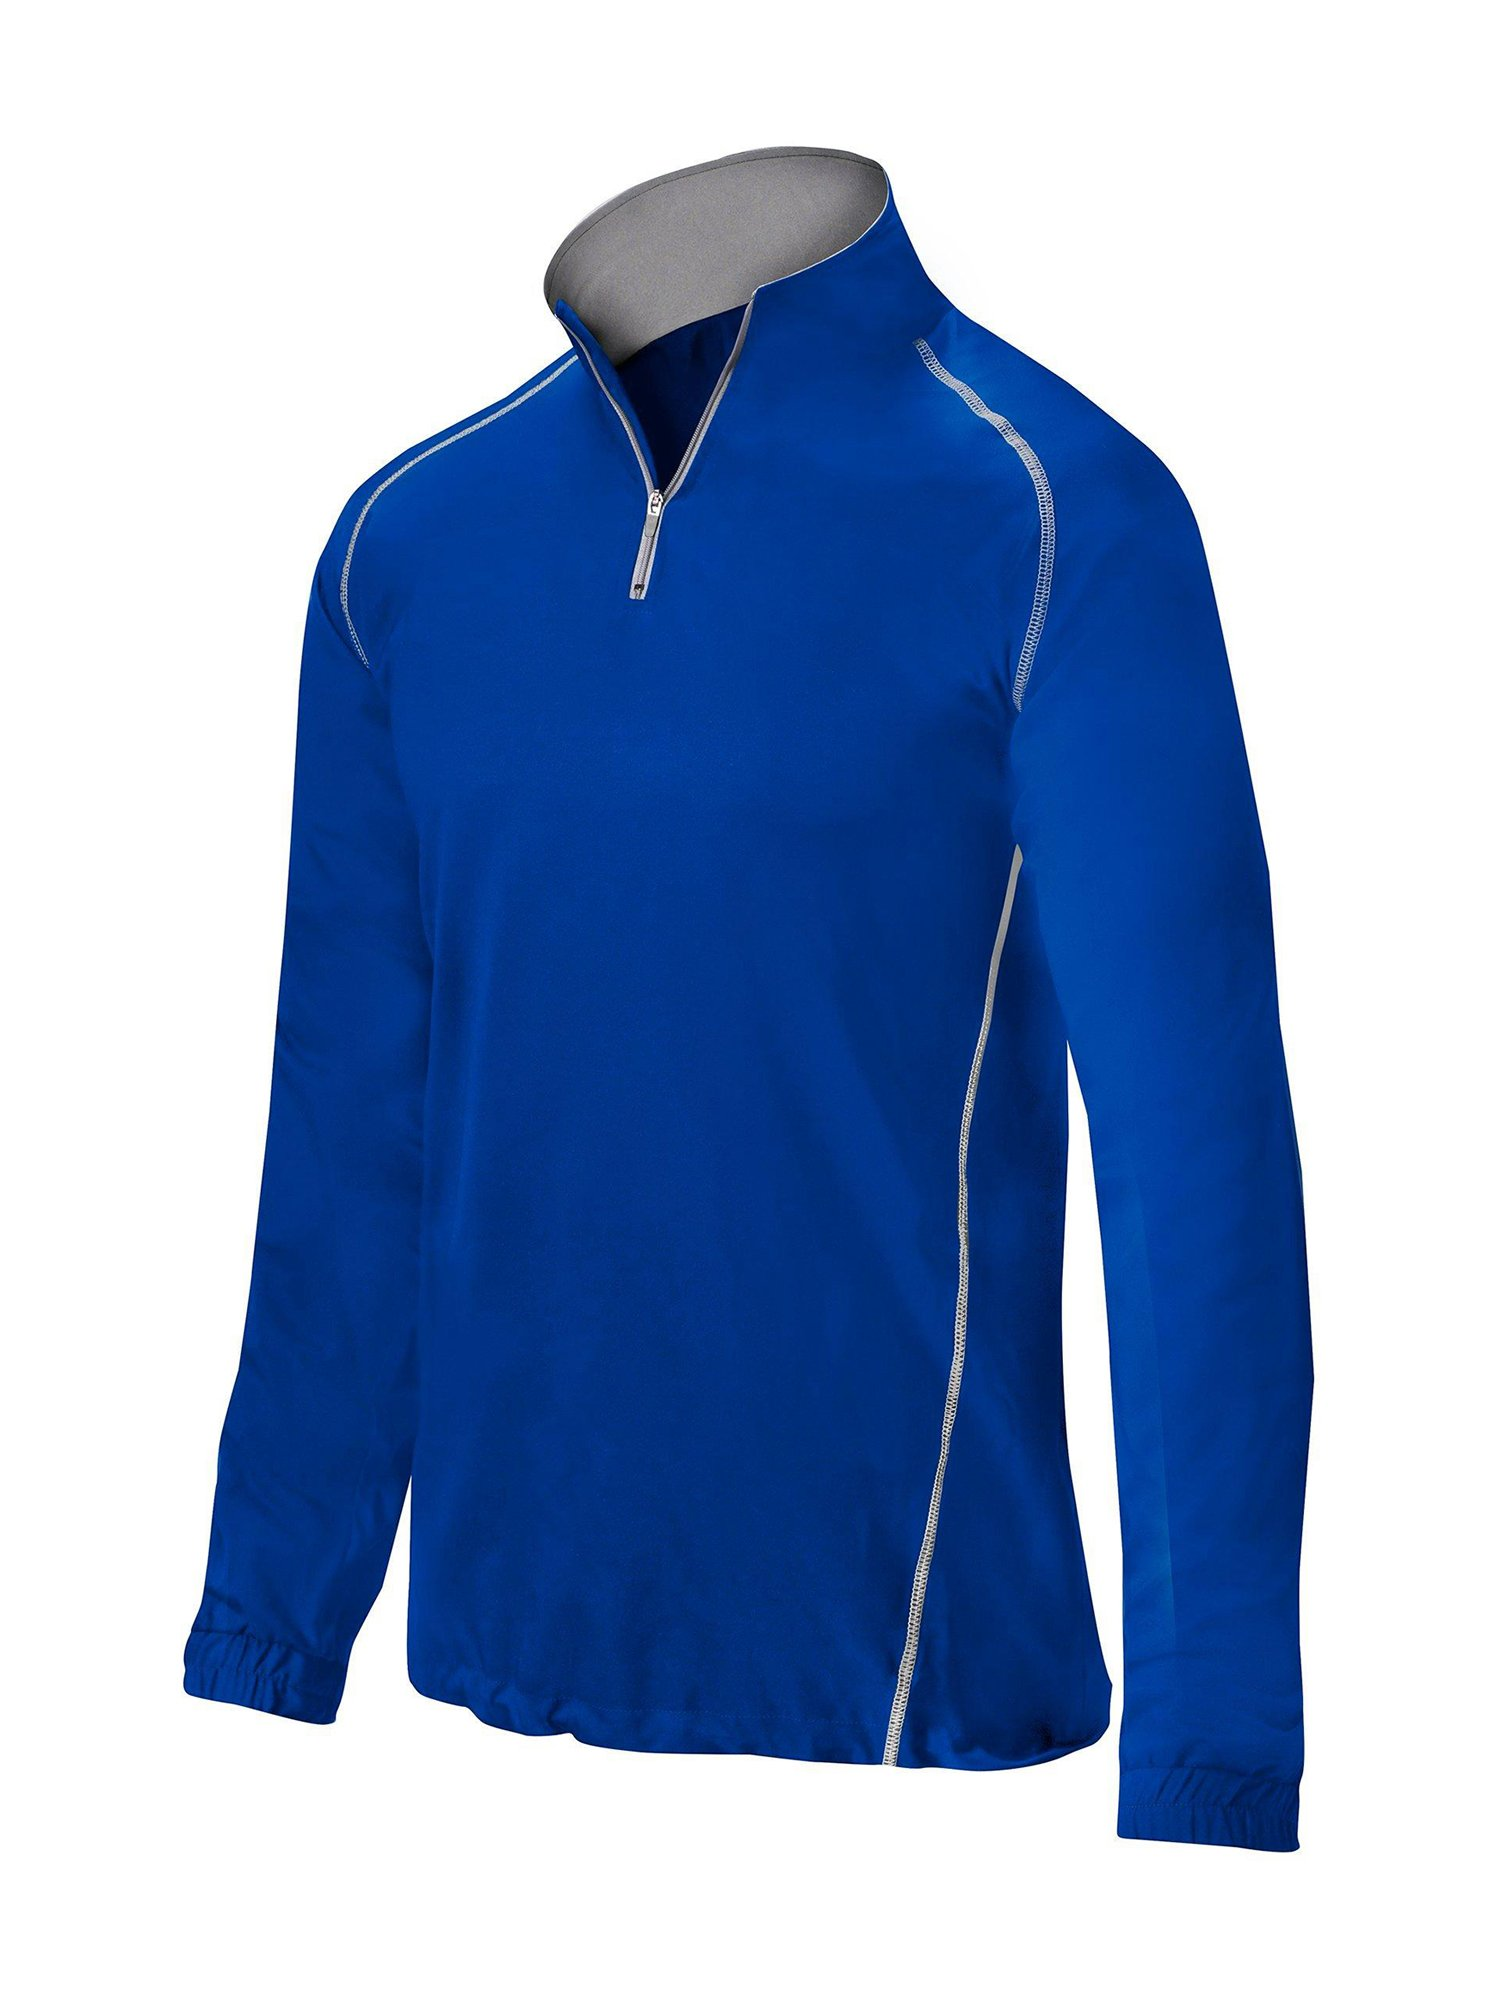 Mizuno Men's Comp 1/4 Zip Pullover, Size Extra Extra Large, Royal (5252) - image 3 of 3